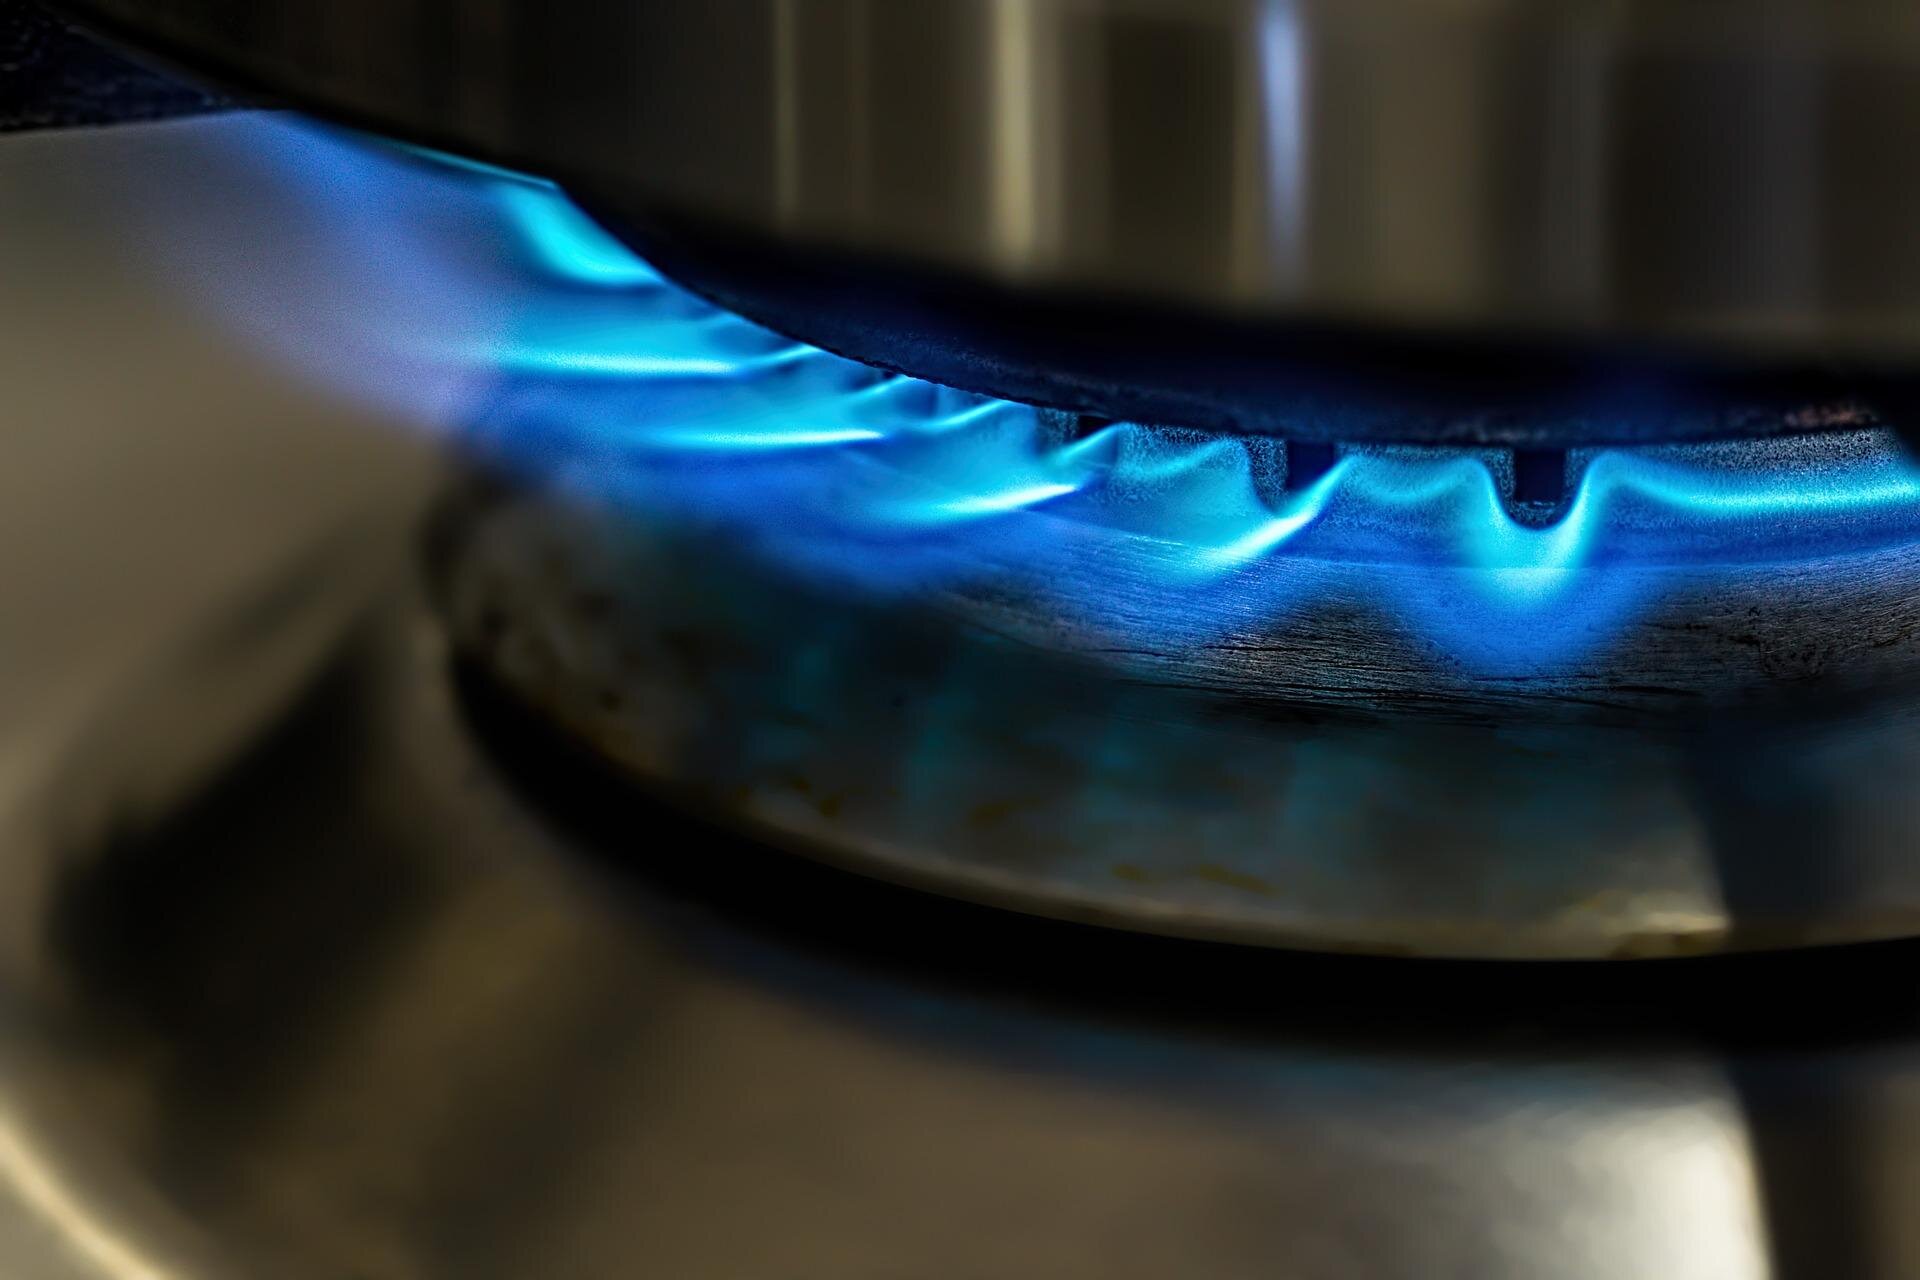 Natural gas used in homes contains hazardous air pollutants, shows Boston-area s..